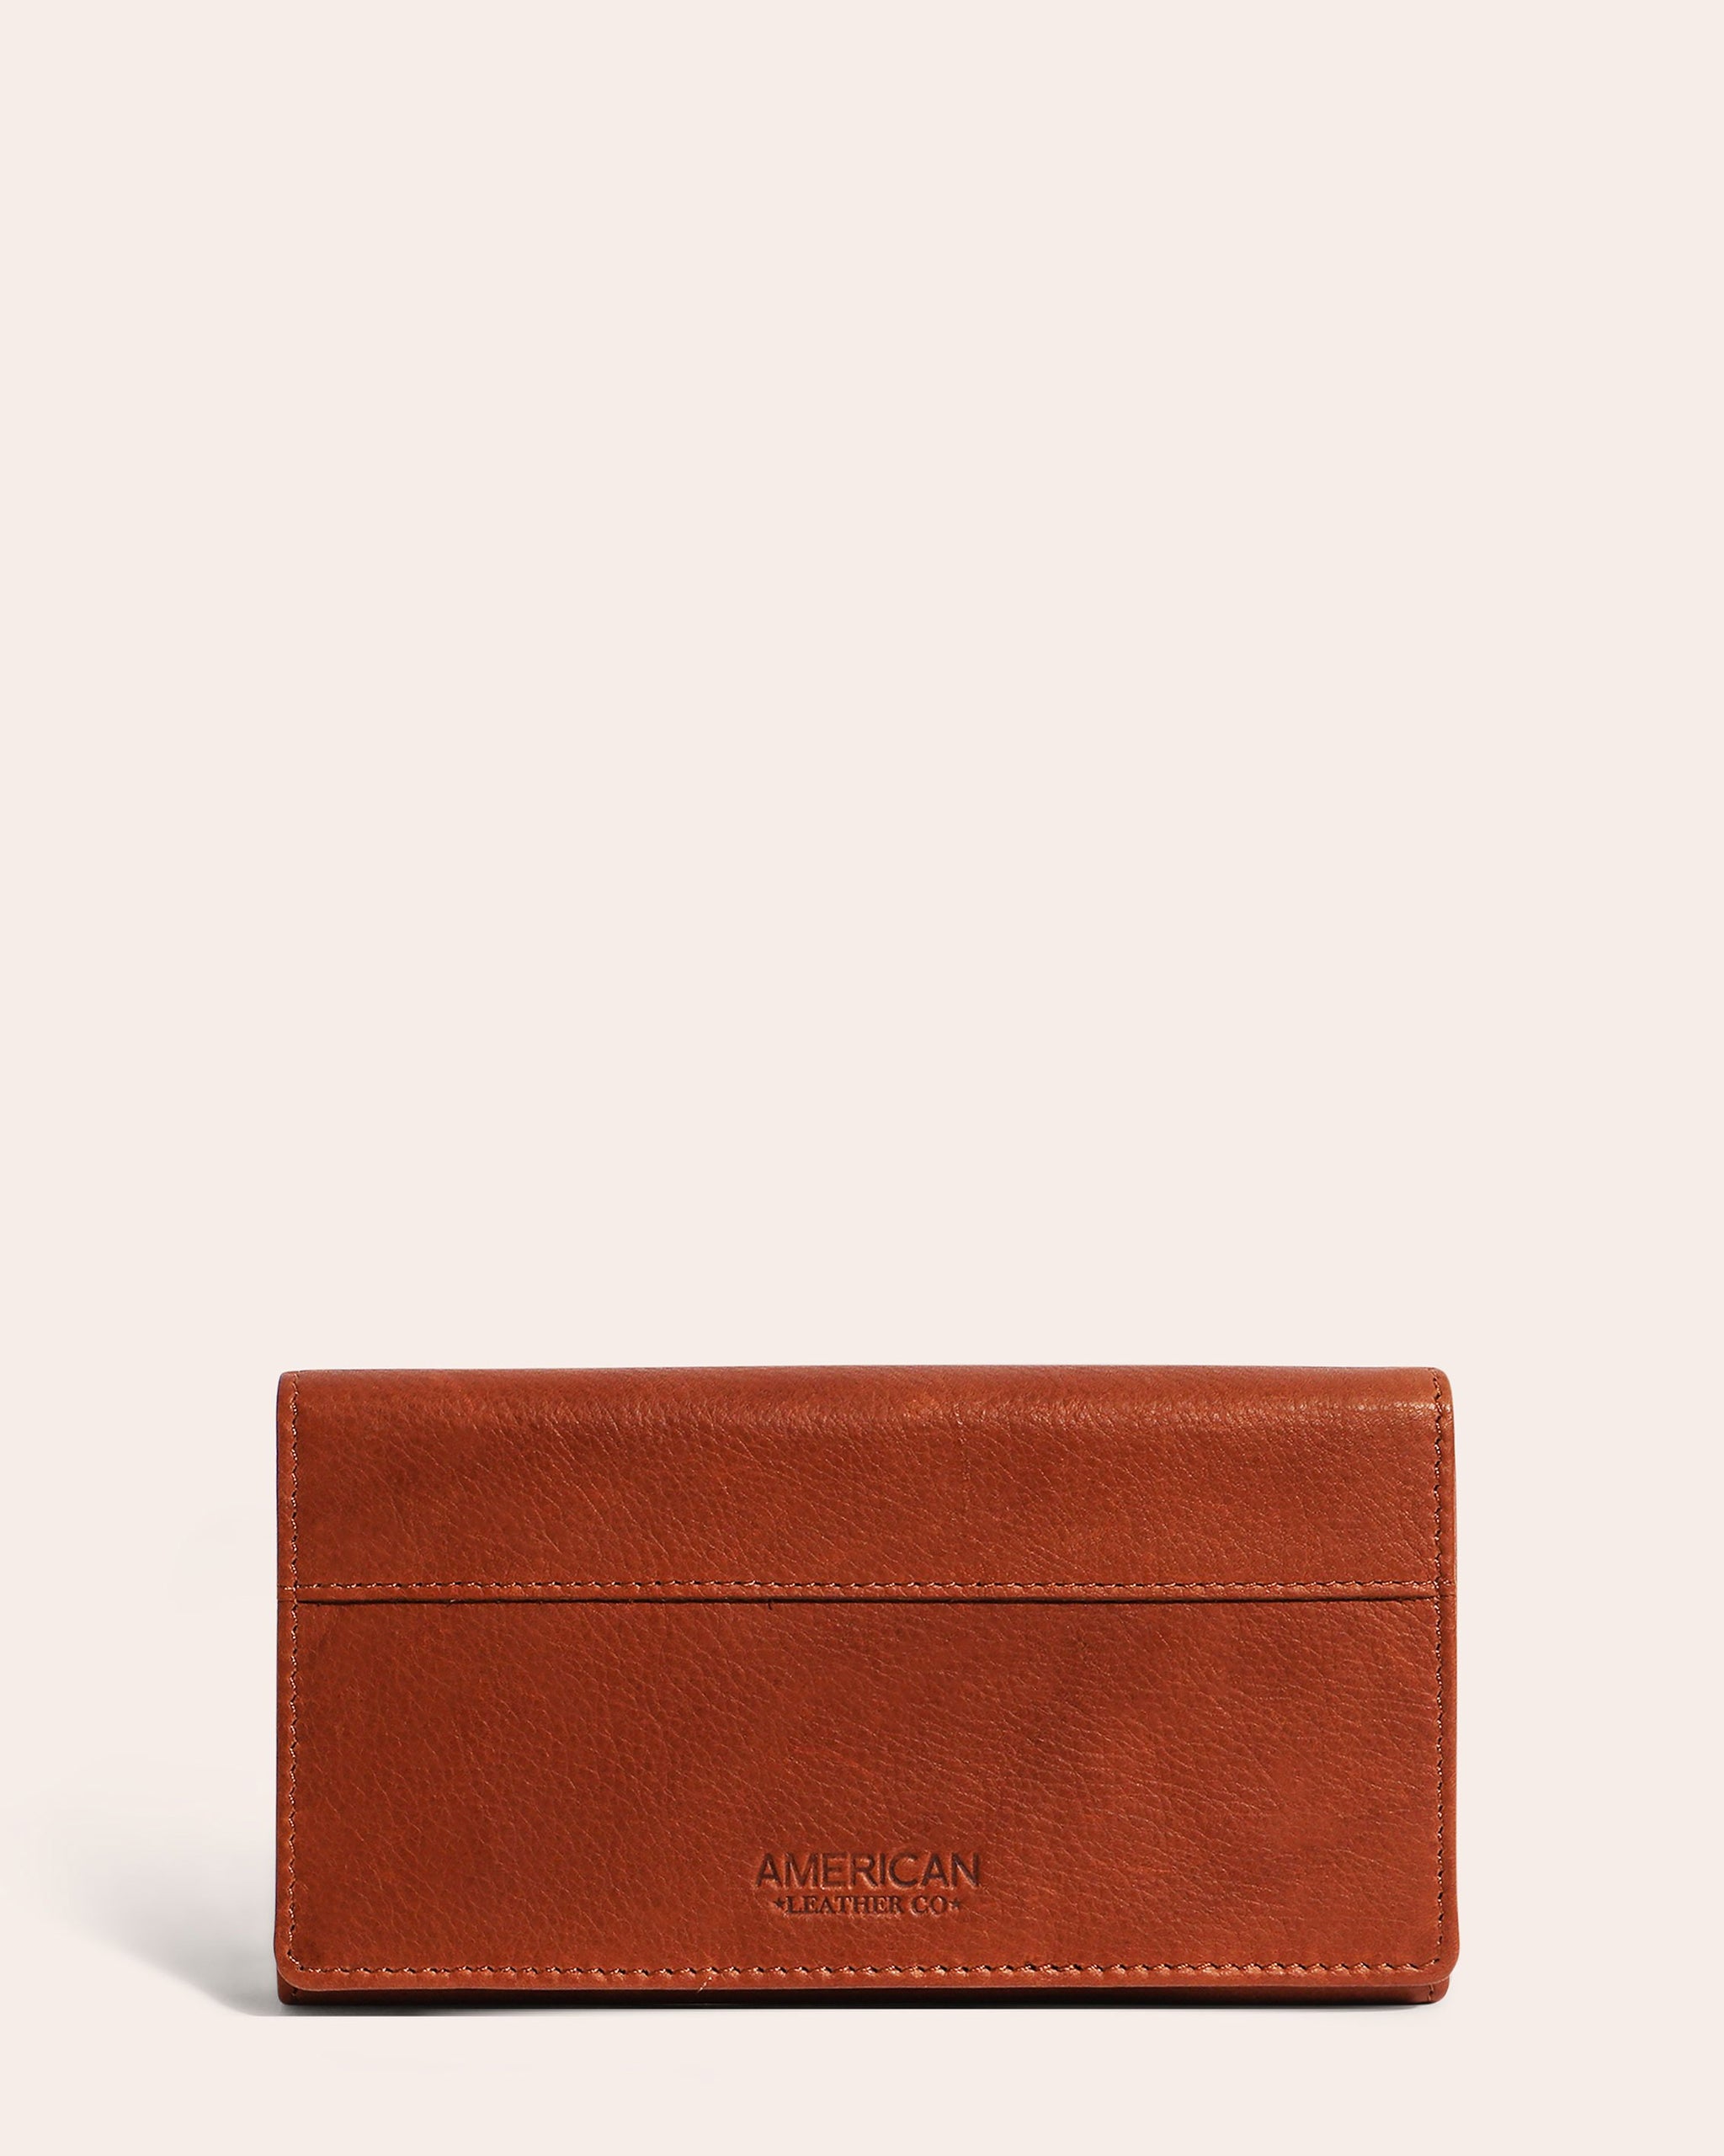 American Leather Co. Clyde Wallet Brandy